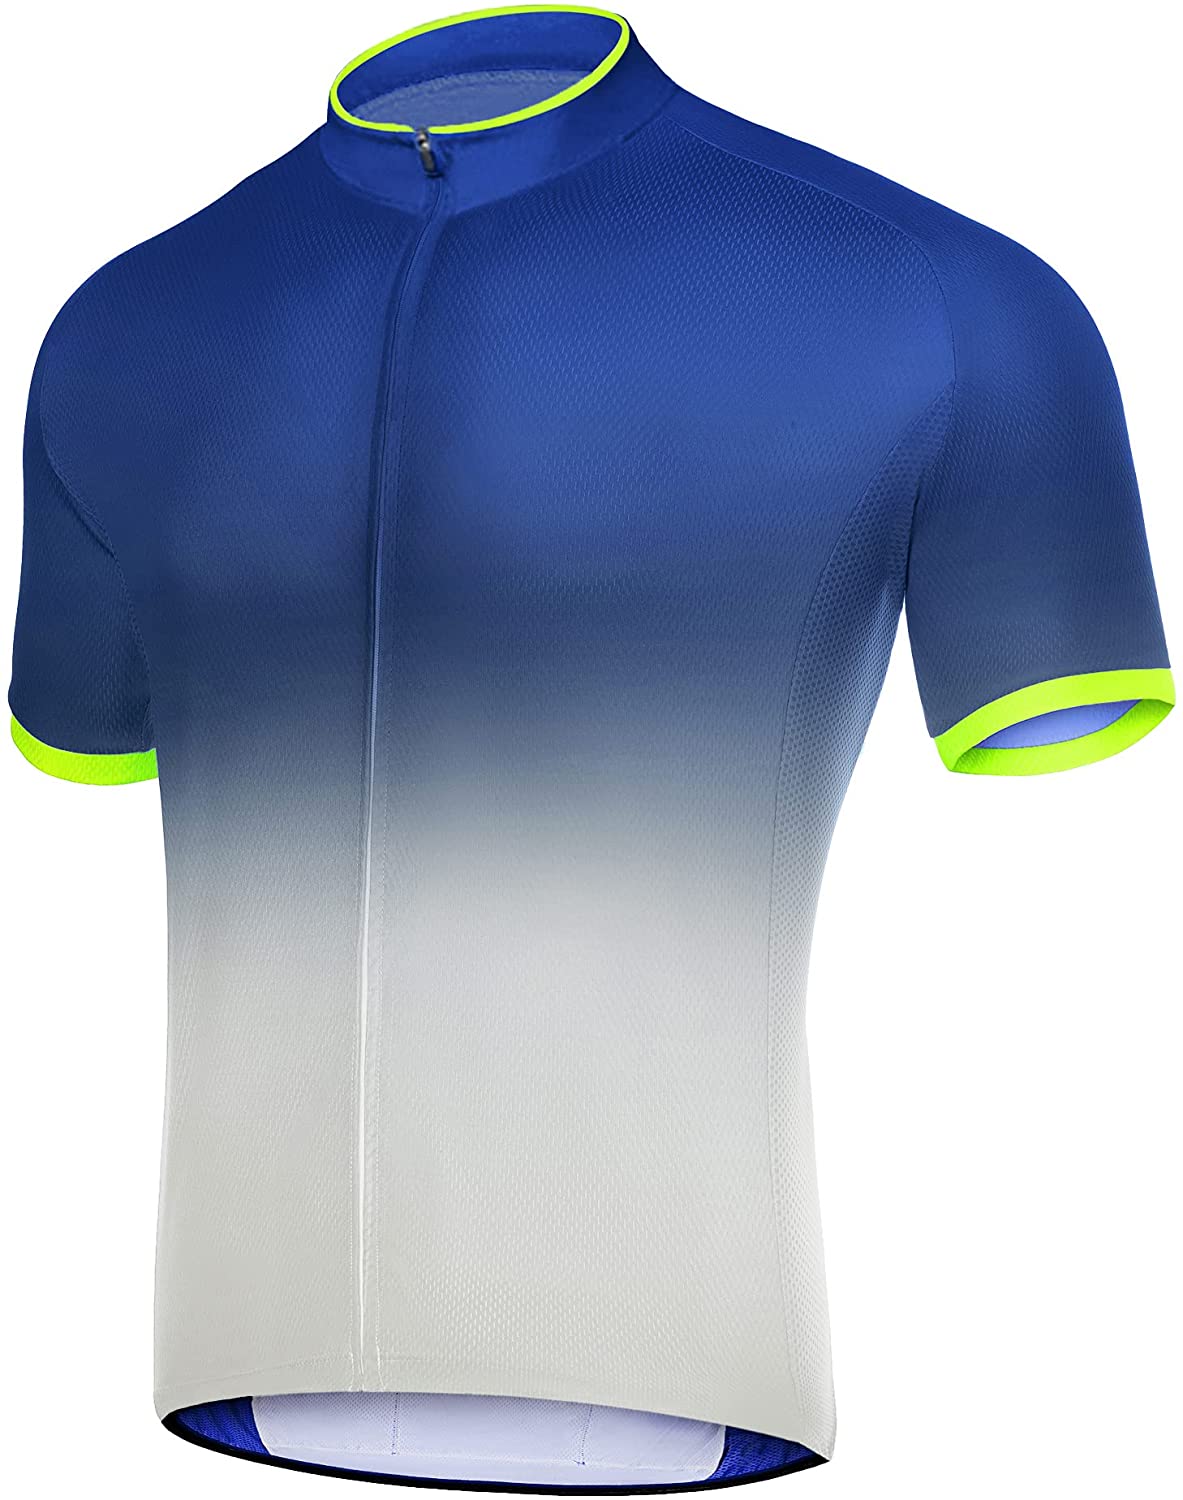 SWISSWELL Men's Cycling Jersey Gradient Color Bike Shirts Short Sleeve Full Zipper with 4 Rear Pockets 